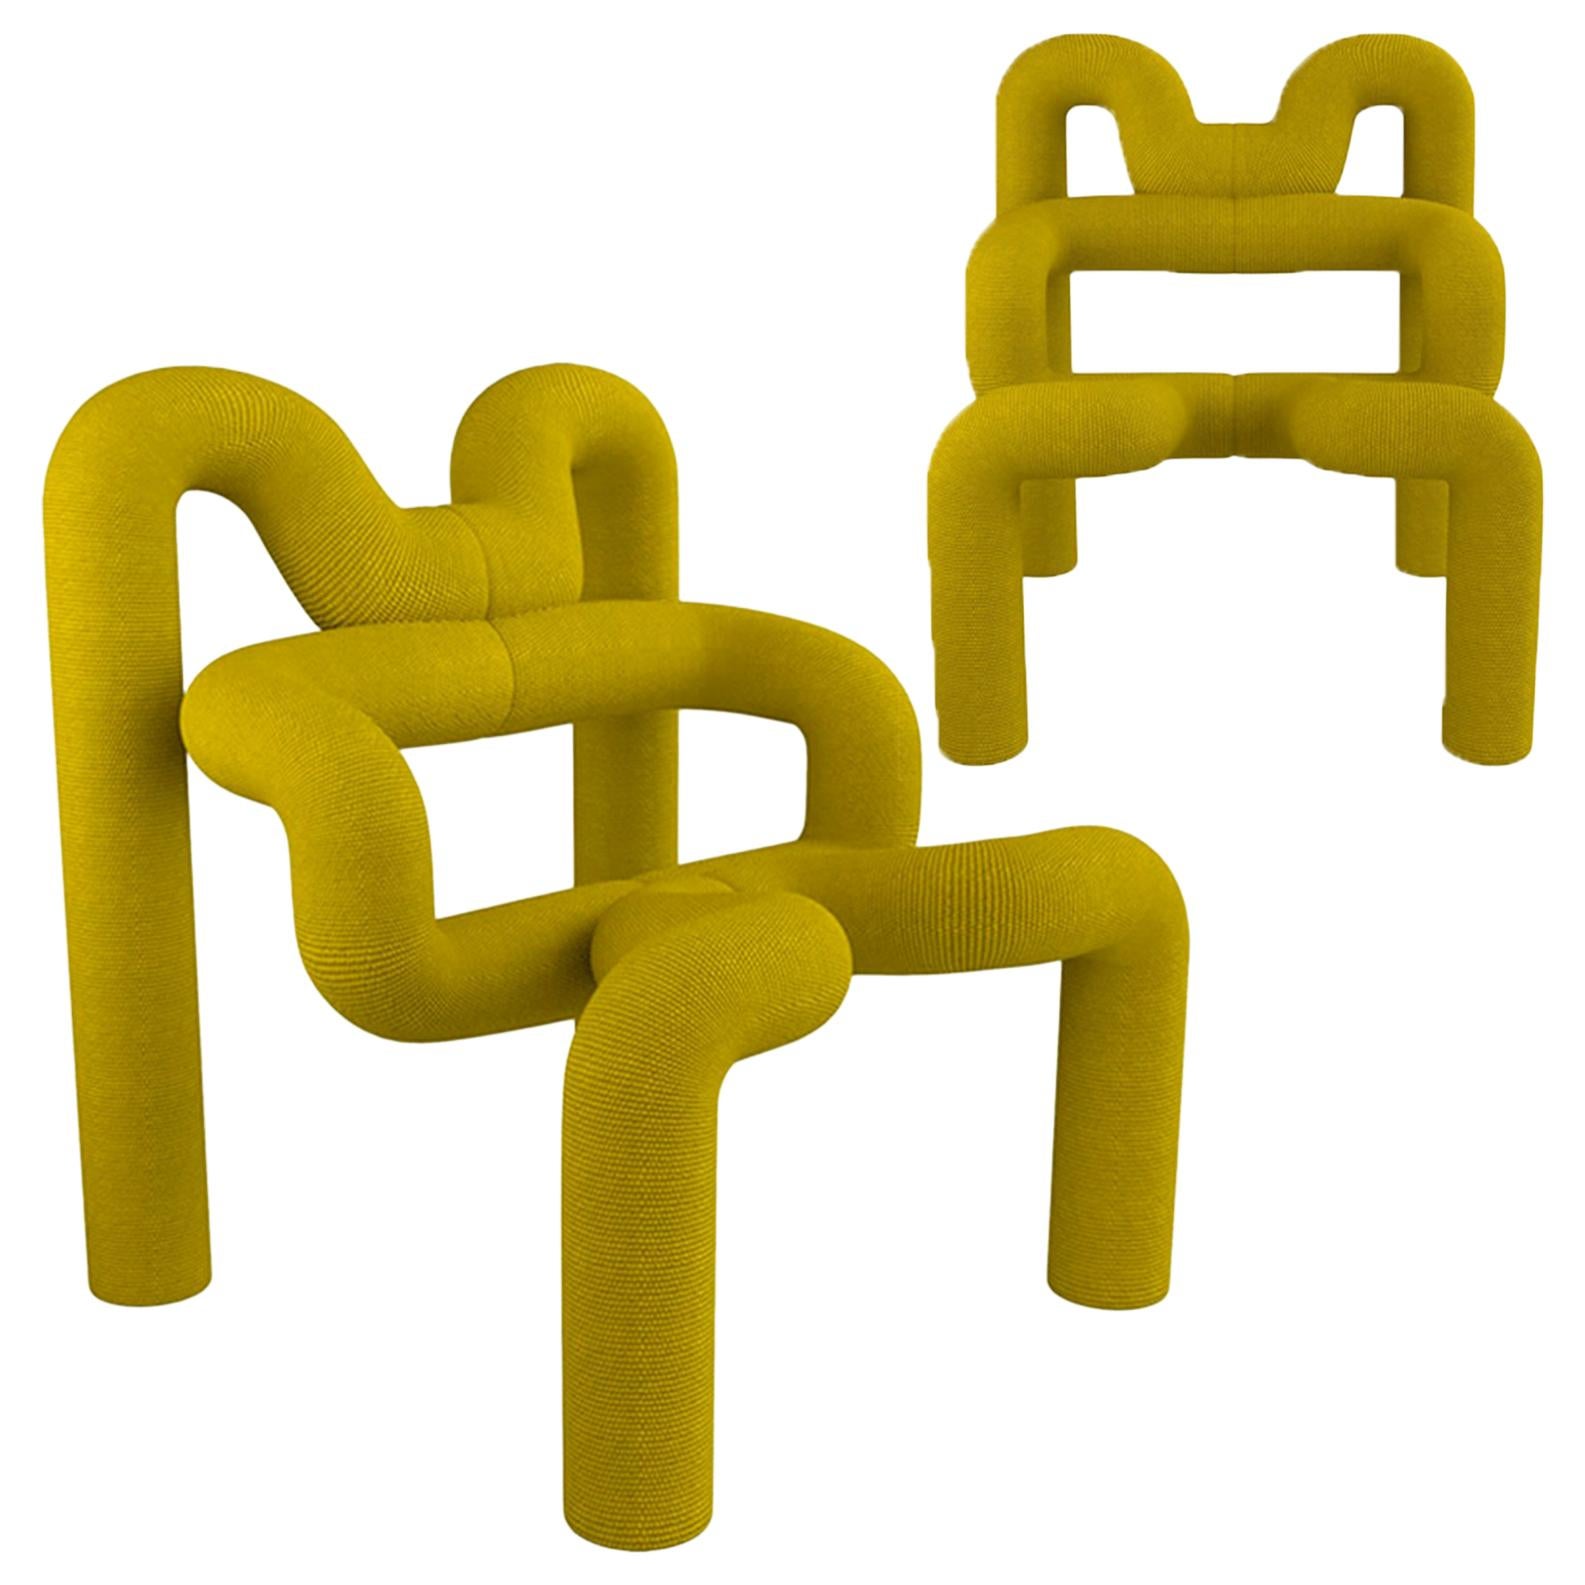 Pair of Iconic Yello Lounge Chairs by Terje Ekstrom, Norway, 1980s